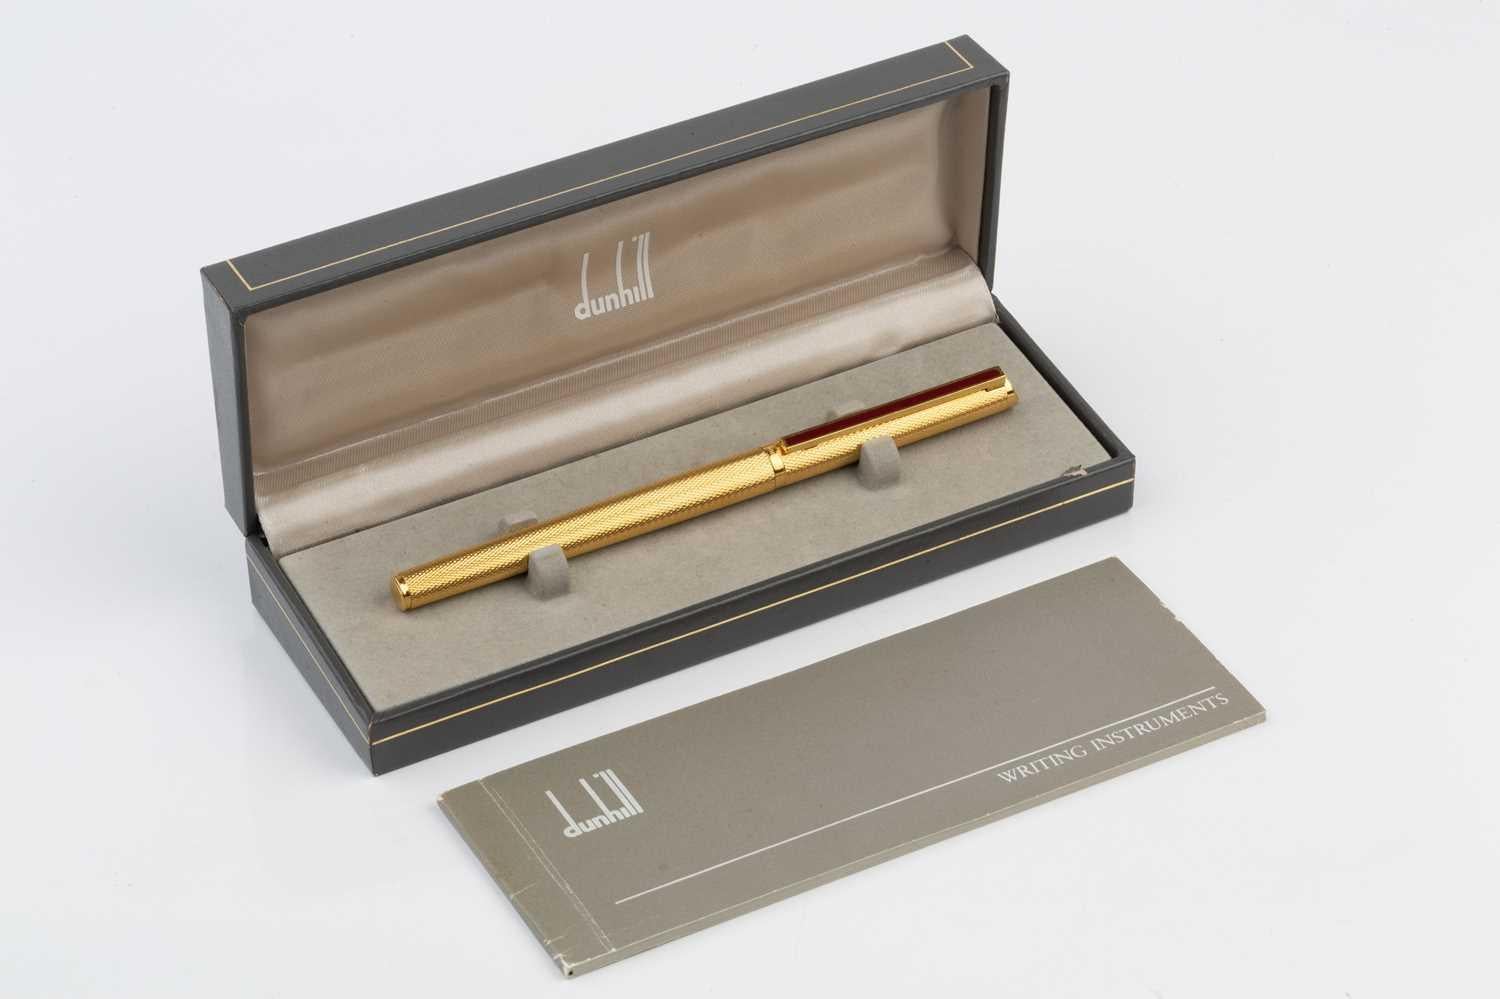 Dunhill Gemline 14k Gold Plated Fountain Pen With An Engine Turned Decoration With Enamel Inset Clip With Original Dunhill Box With Outer Cardboard Sleeve
Ideal present for Father's Day, Christmas etc.

